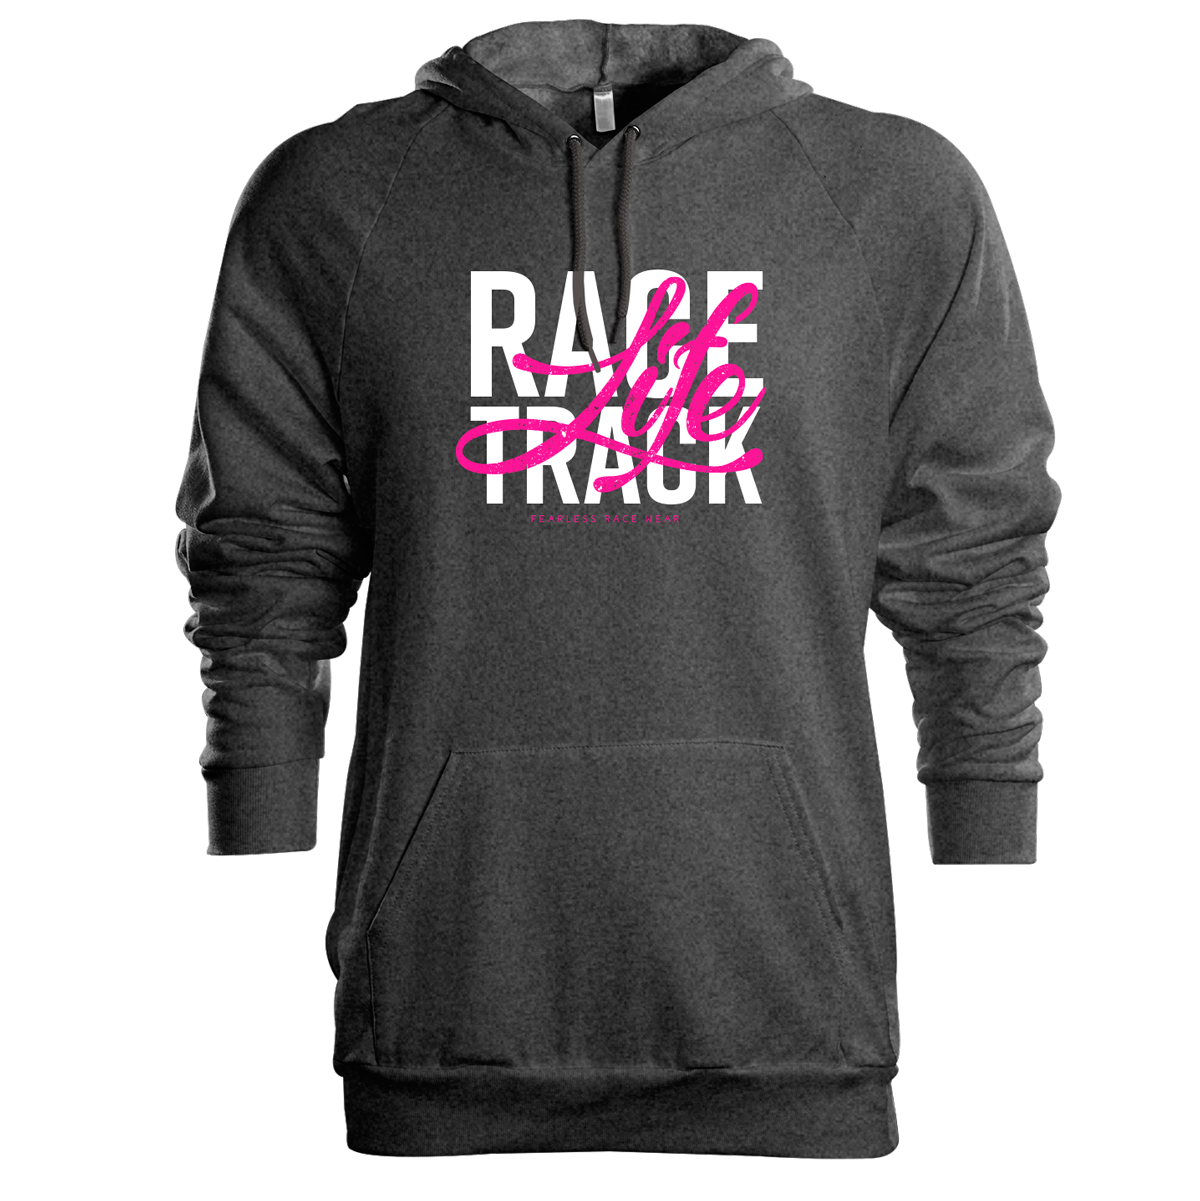 Racetrack Life Hoodies + Red Print Fuchsia | | Wear Fearless T-Shirts Race or